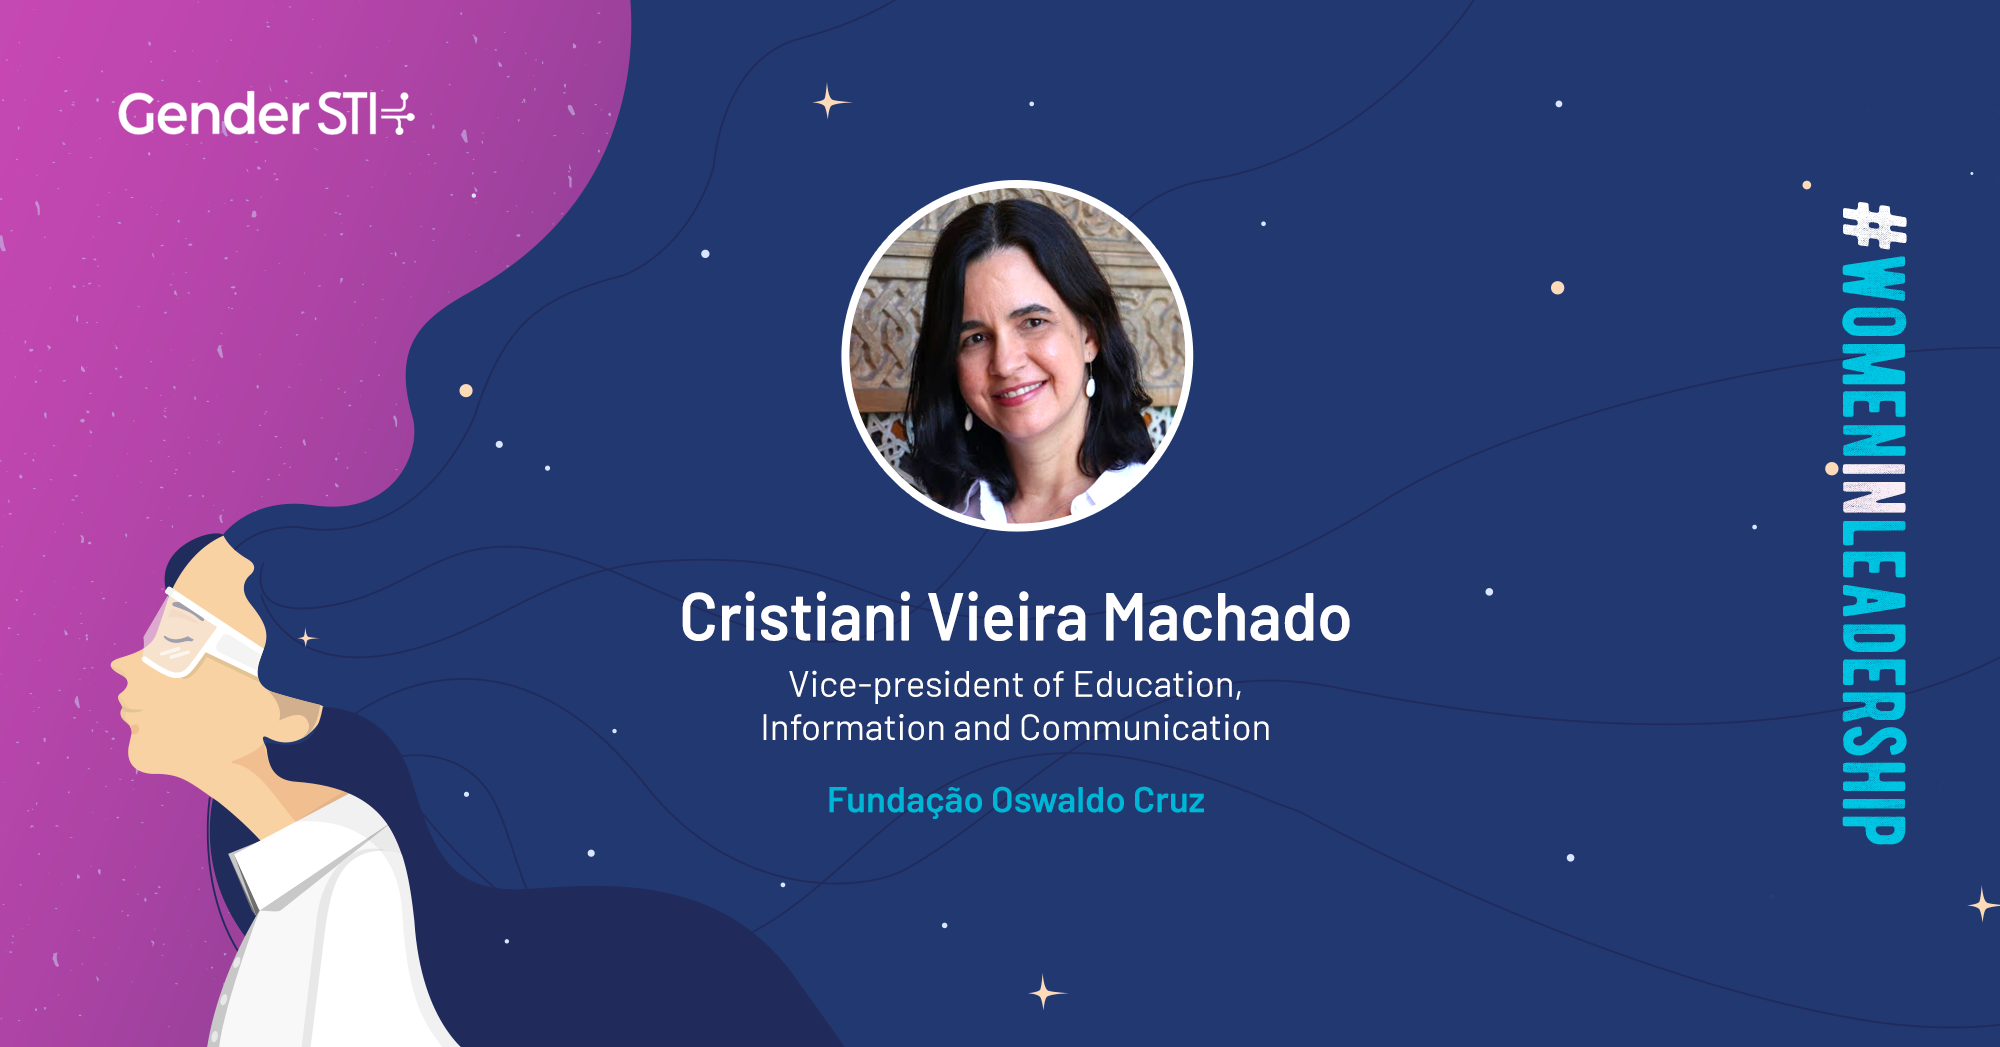 Cristiani Vieira Machado, Vice-president of Education, Information and Communication at Fiocruz, is one of Gender STI's #WomenInLeadership nominees.